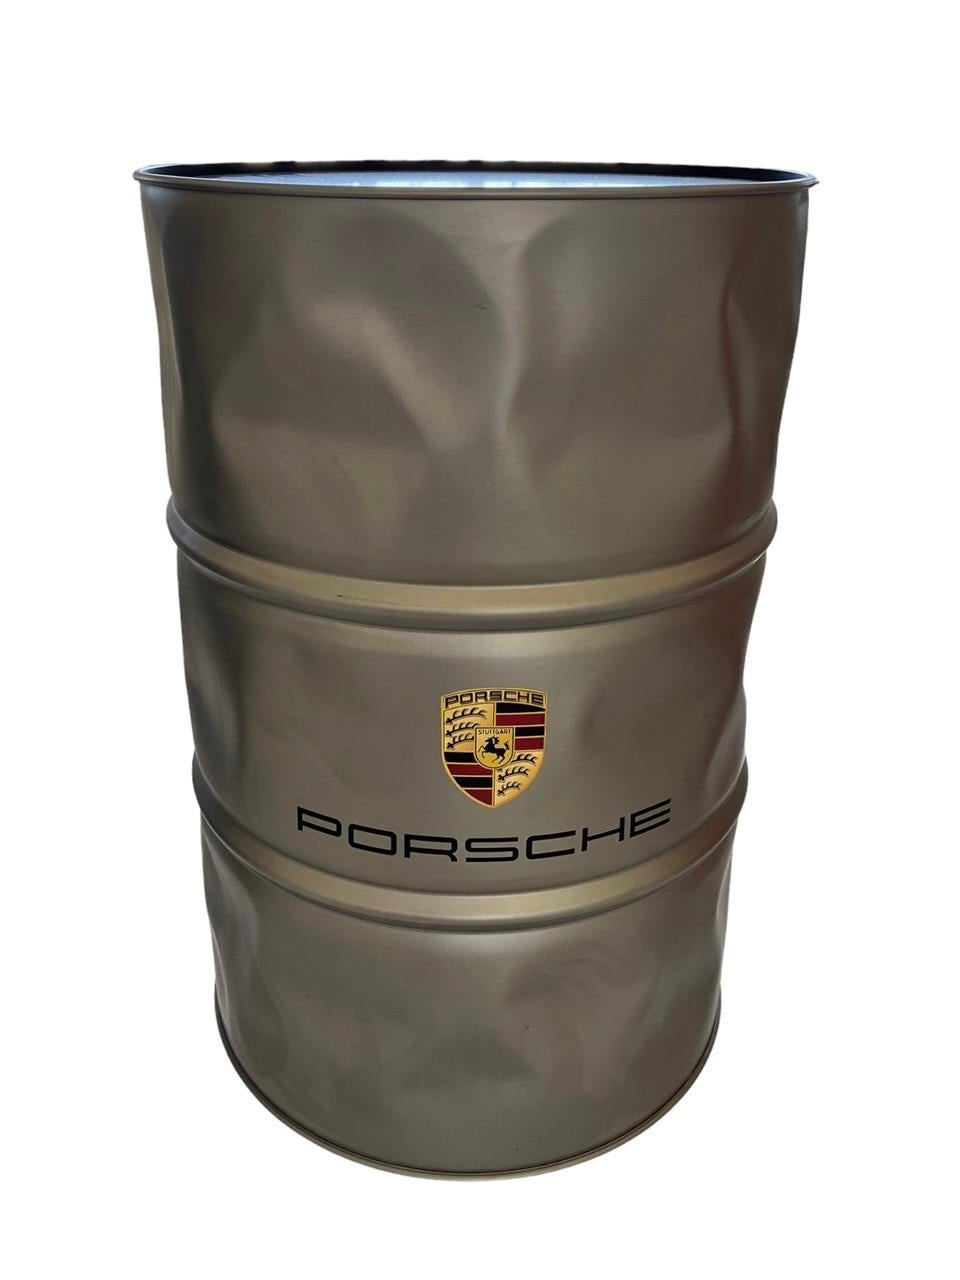 French Porsche Barrel '2019' by Marc Boffin For Sale